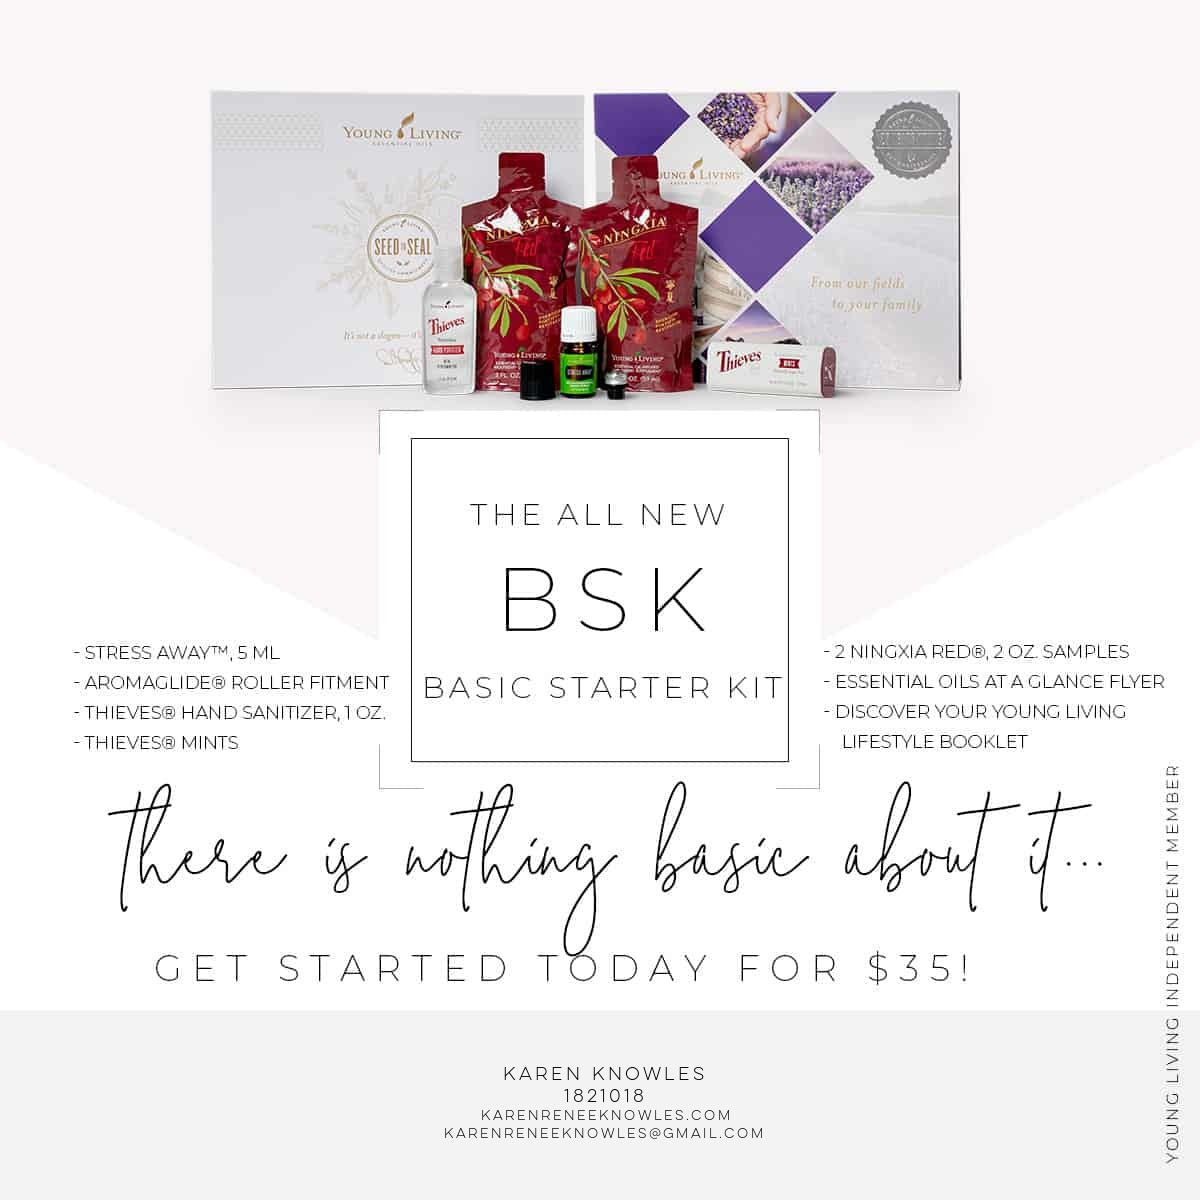 Inside Peak at The Basic Starter Kit by Young Living